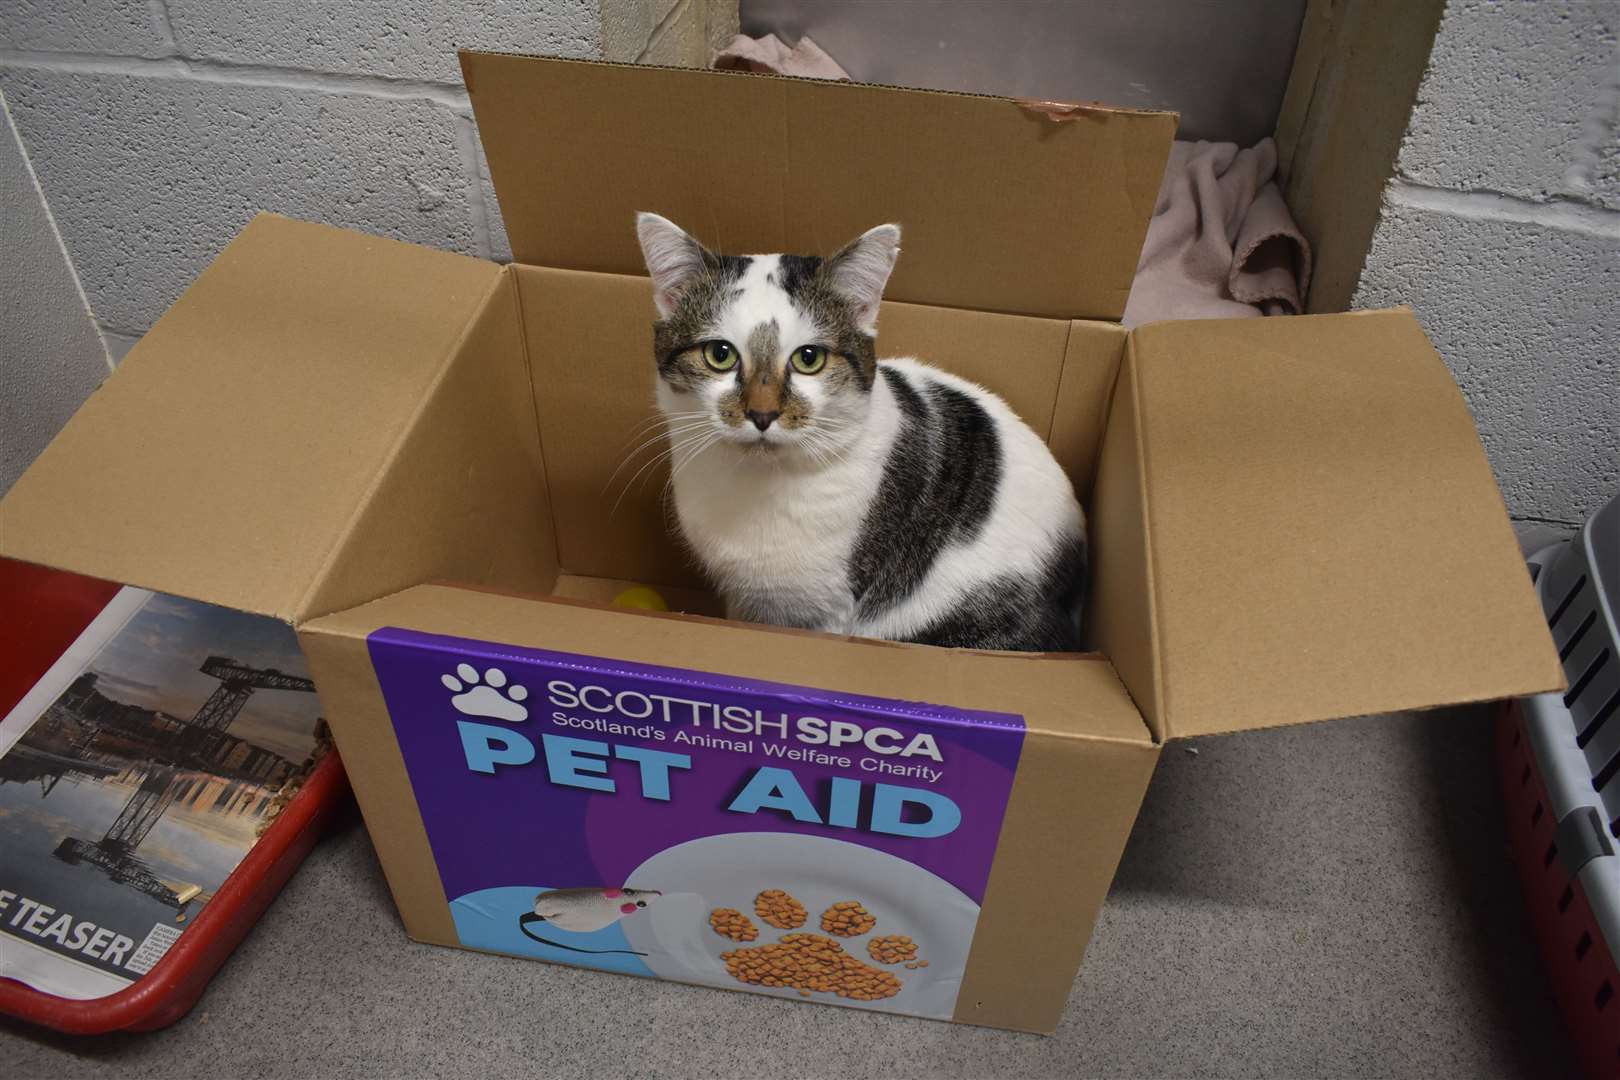 The Scottish SPCA is looking for more donations to its Pet Aid service.